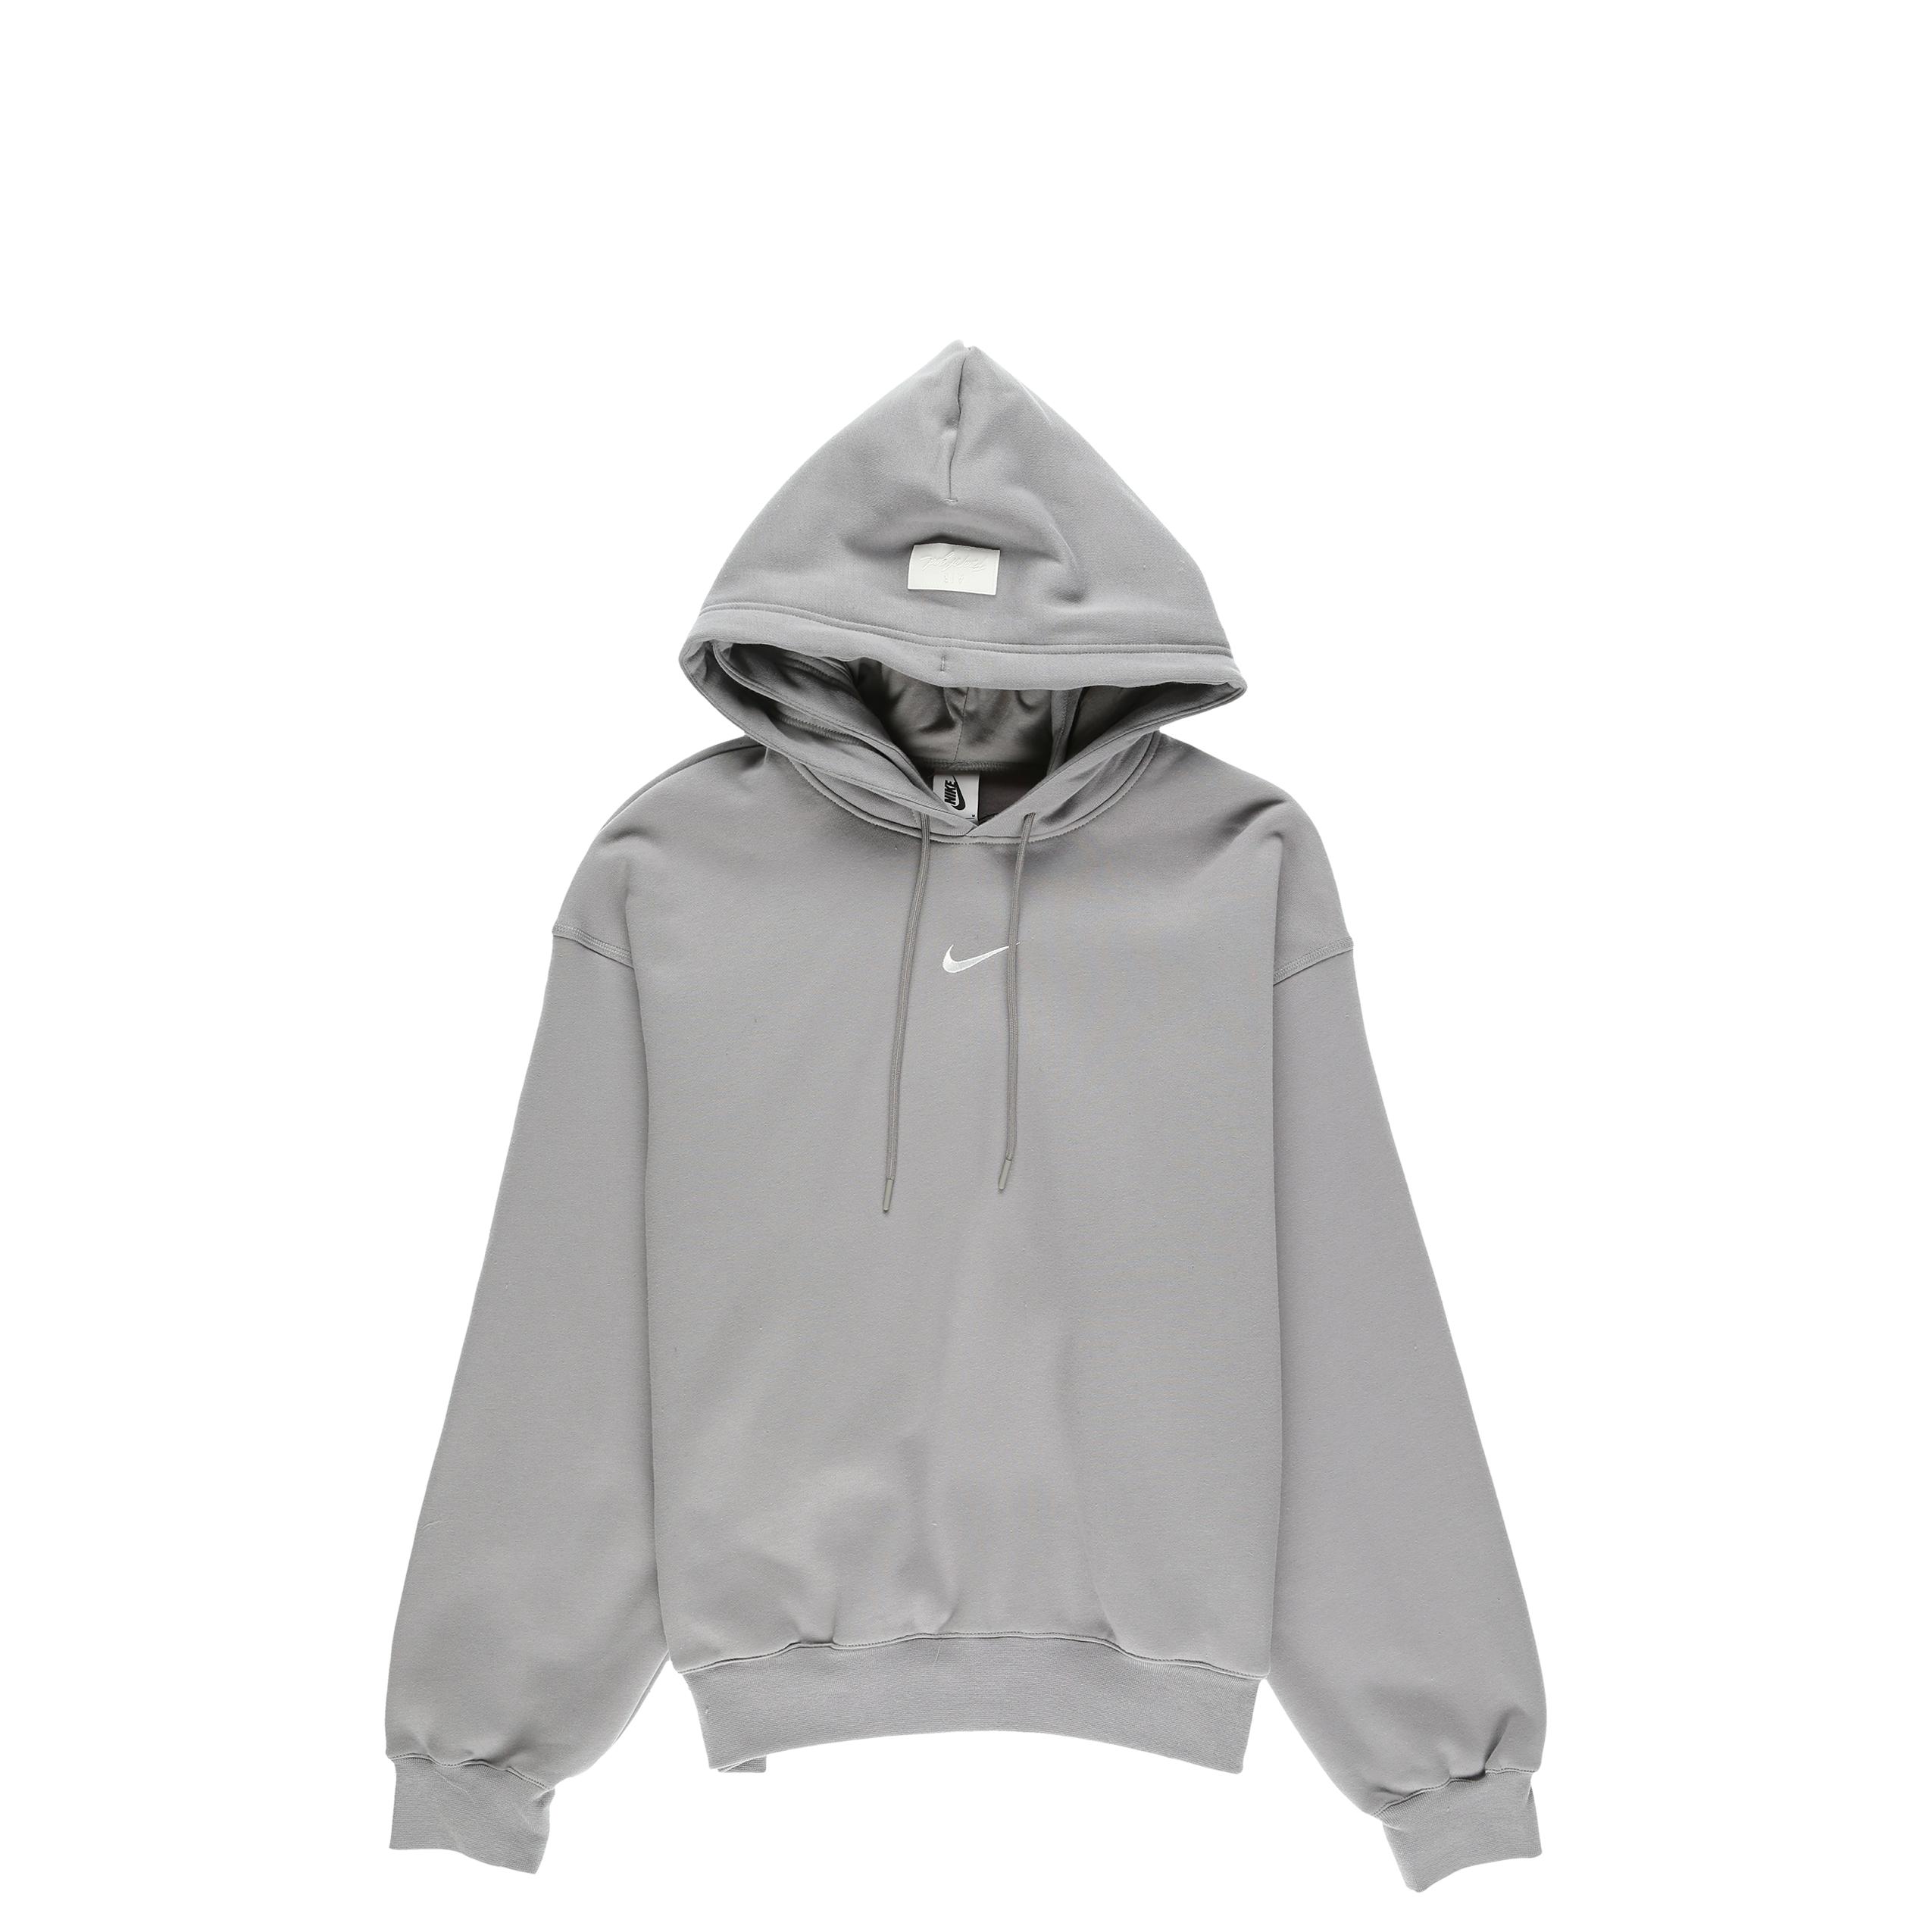 Nike Cotton Fear Of God Hoodie in Gray for Men - Lyst